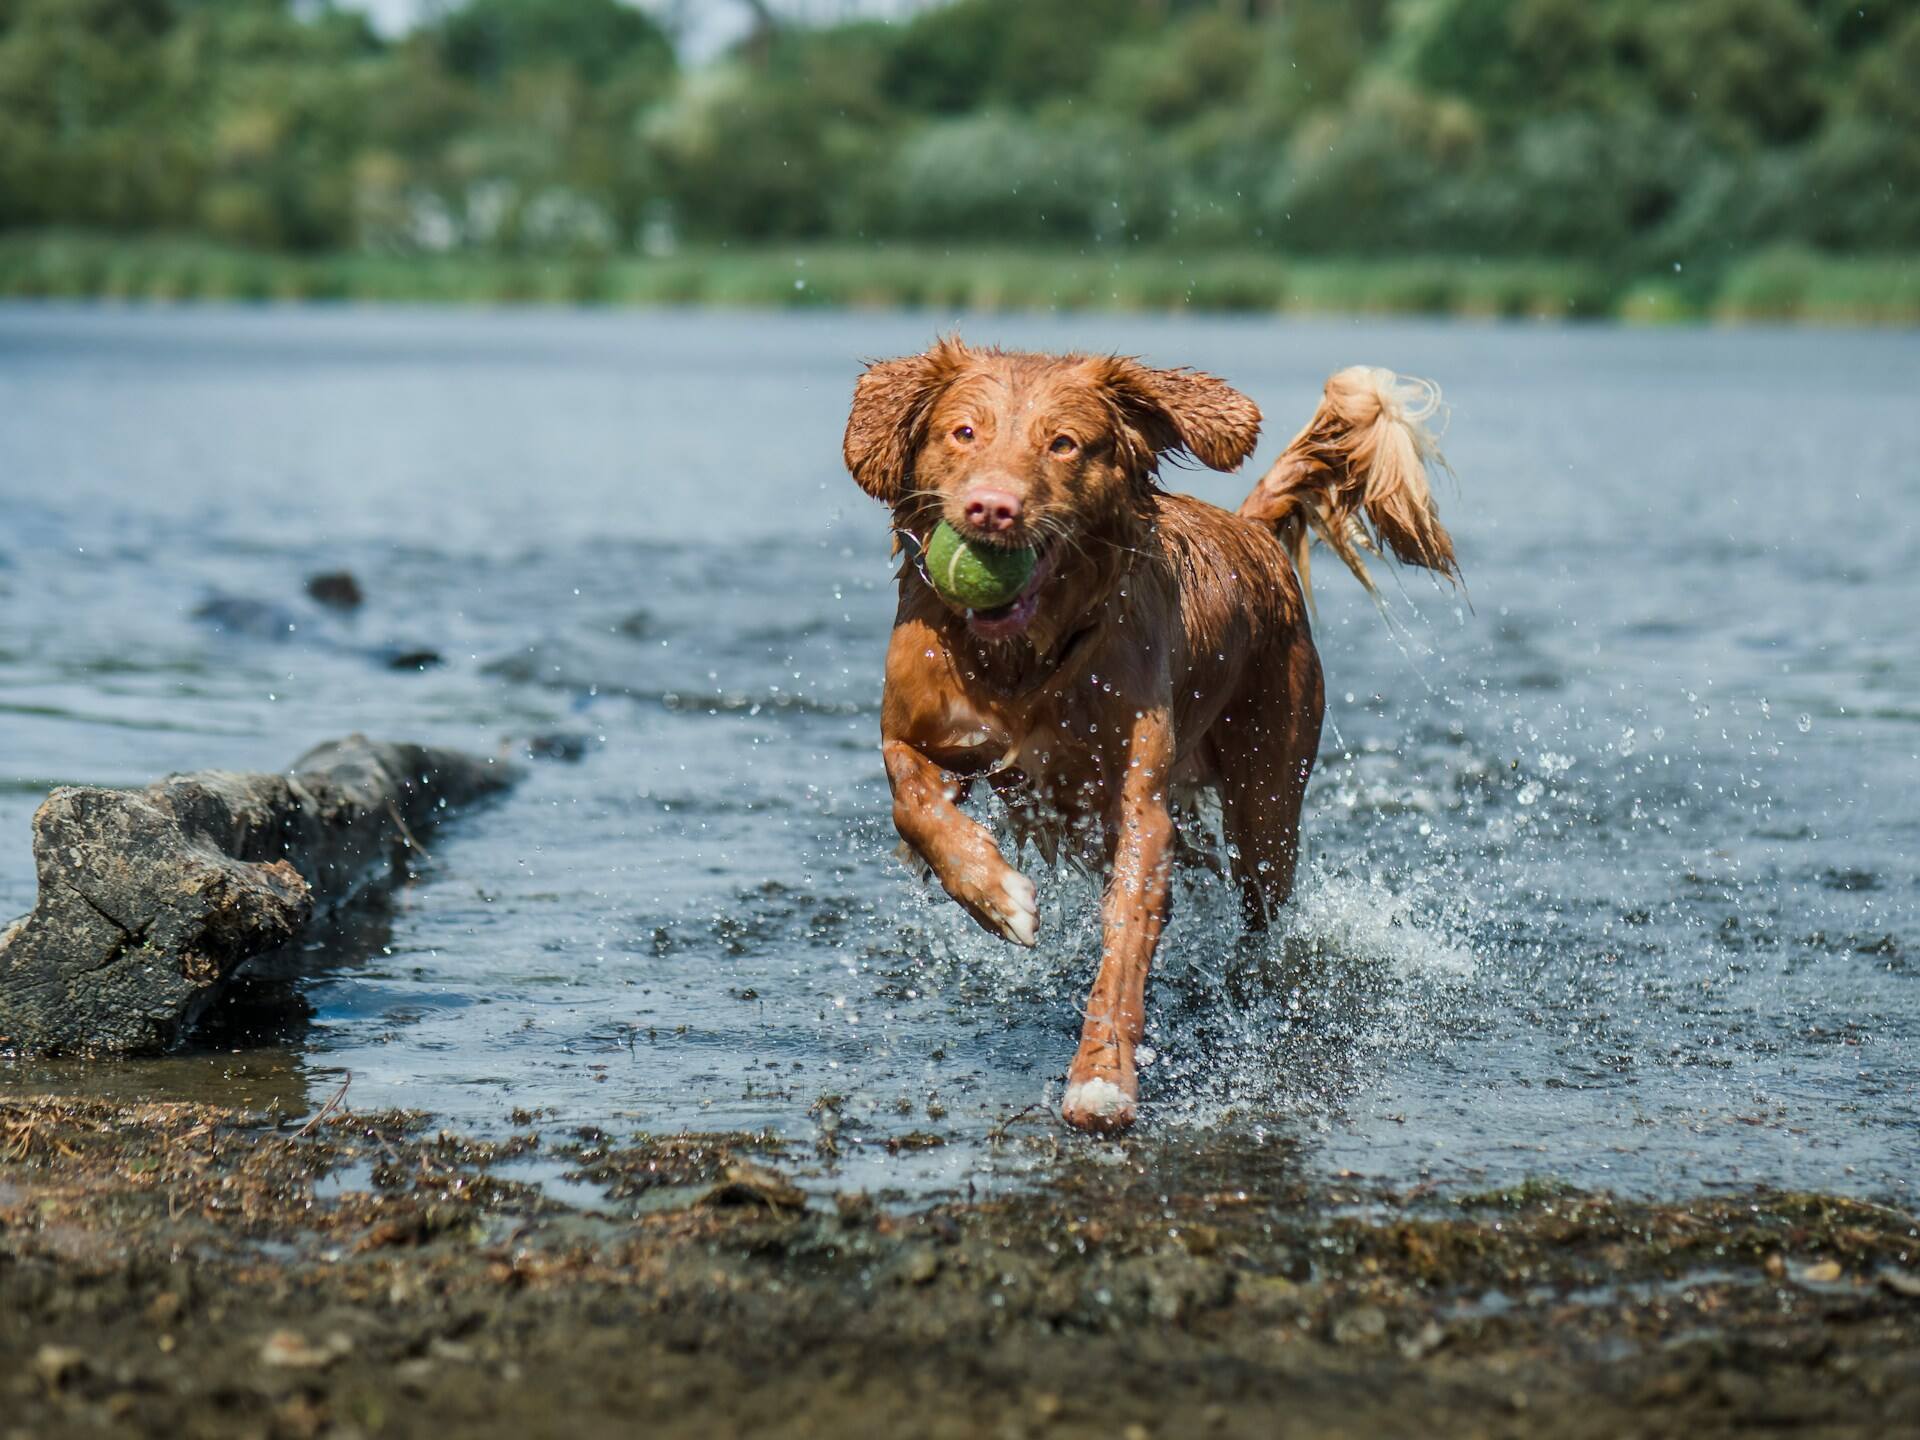 A brown dog splashing in a lake with a green ball in their mouth